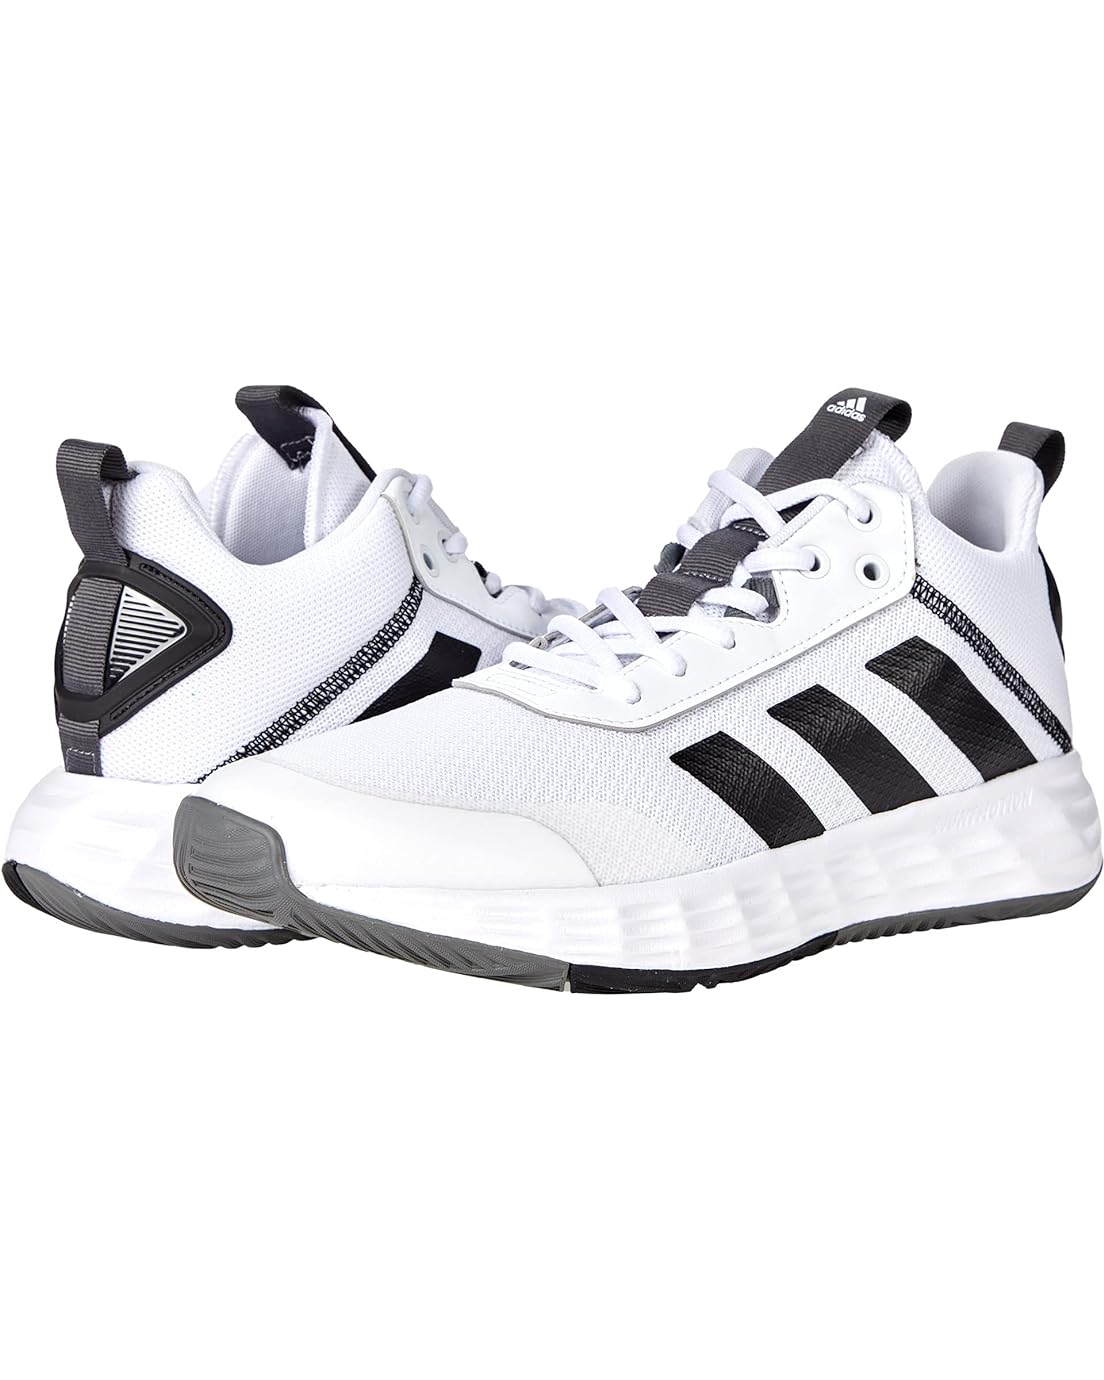 Adidas Own The Game 20 Basketball Shoes